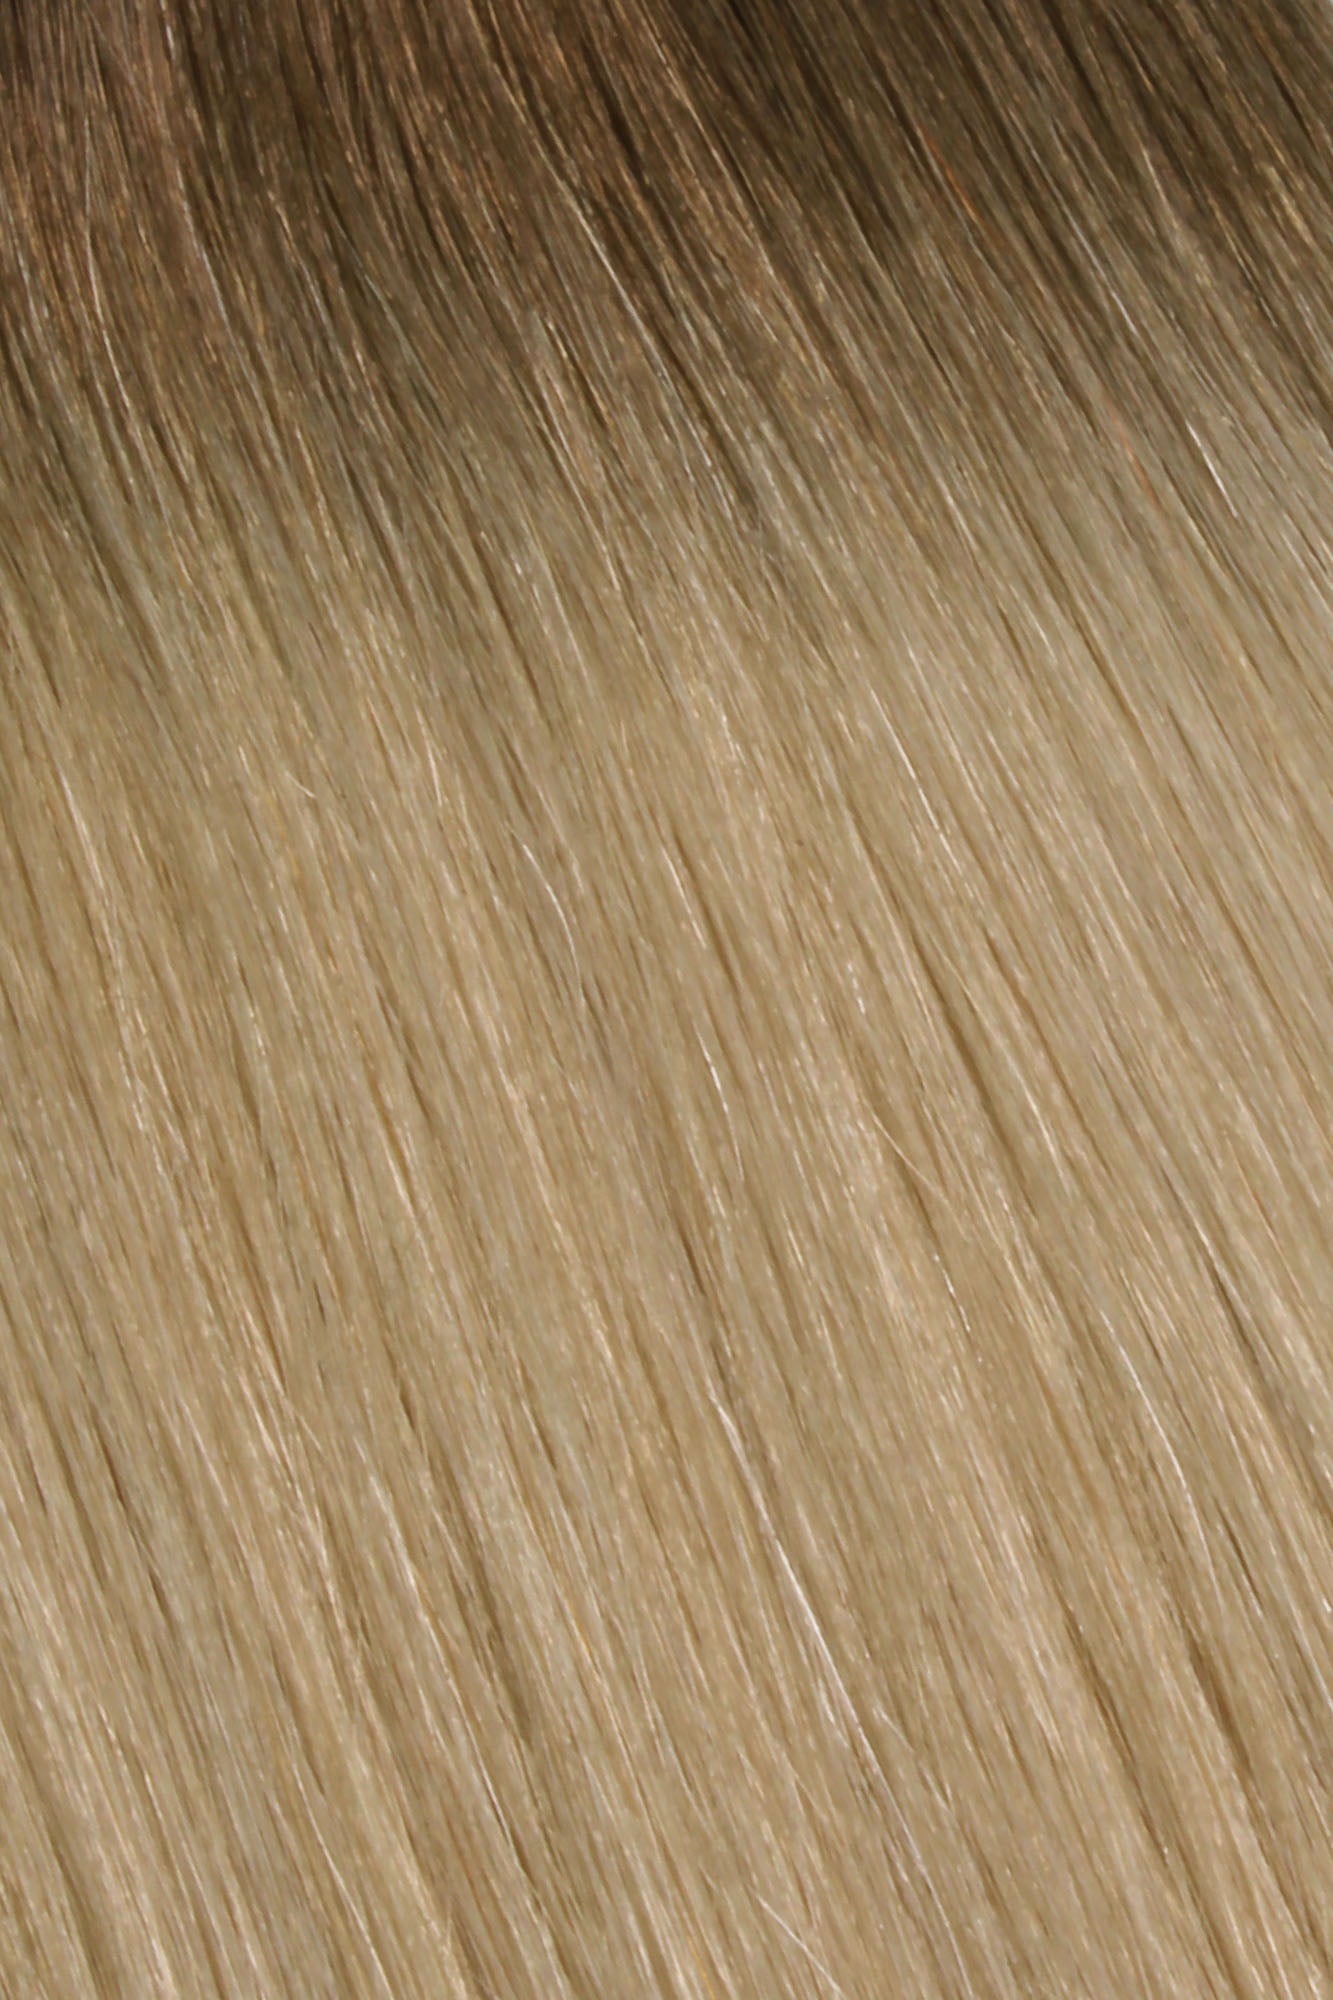 SEAMLESS® Flat Weft 18 Inches - SWAY Hair Extensions Rooted-Beach-Ash-Blonde-R5-9-613 Natural SEAMLESS® Flat Weft 18 Inches extensions. Thin, flexible, and discreet. 100% Double Drawn Remy Human Hair. Versatile and reusable